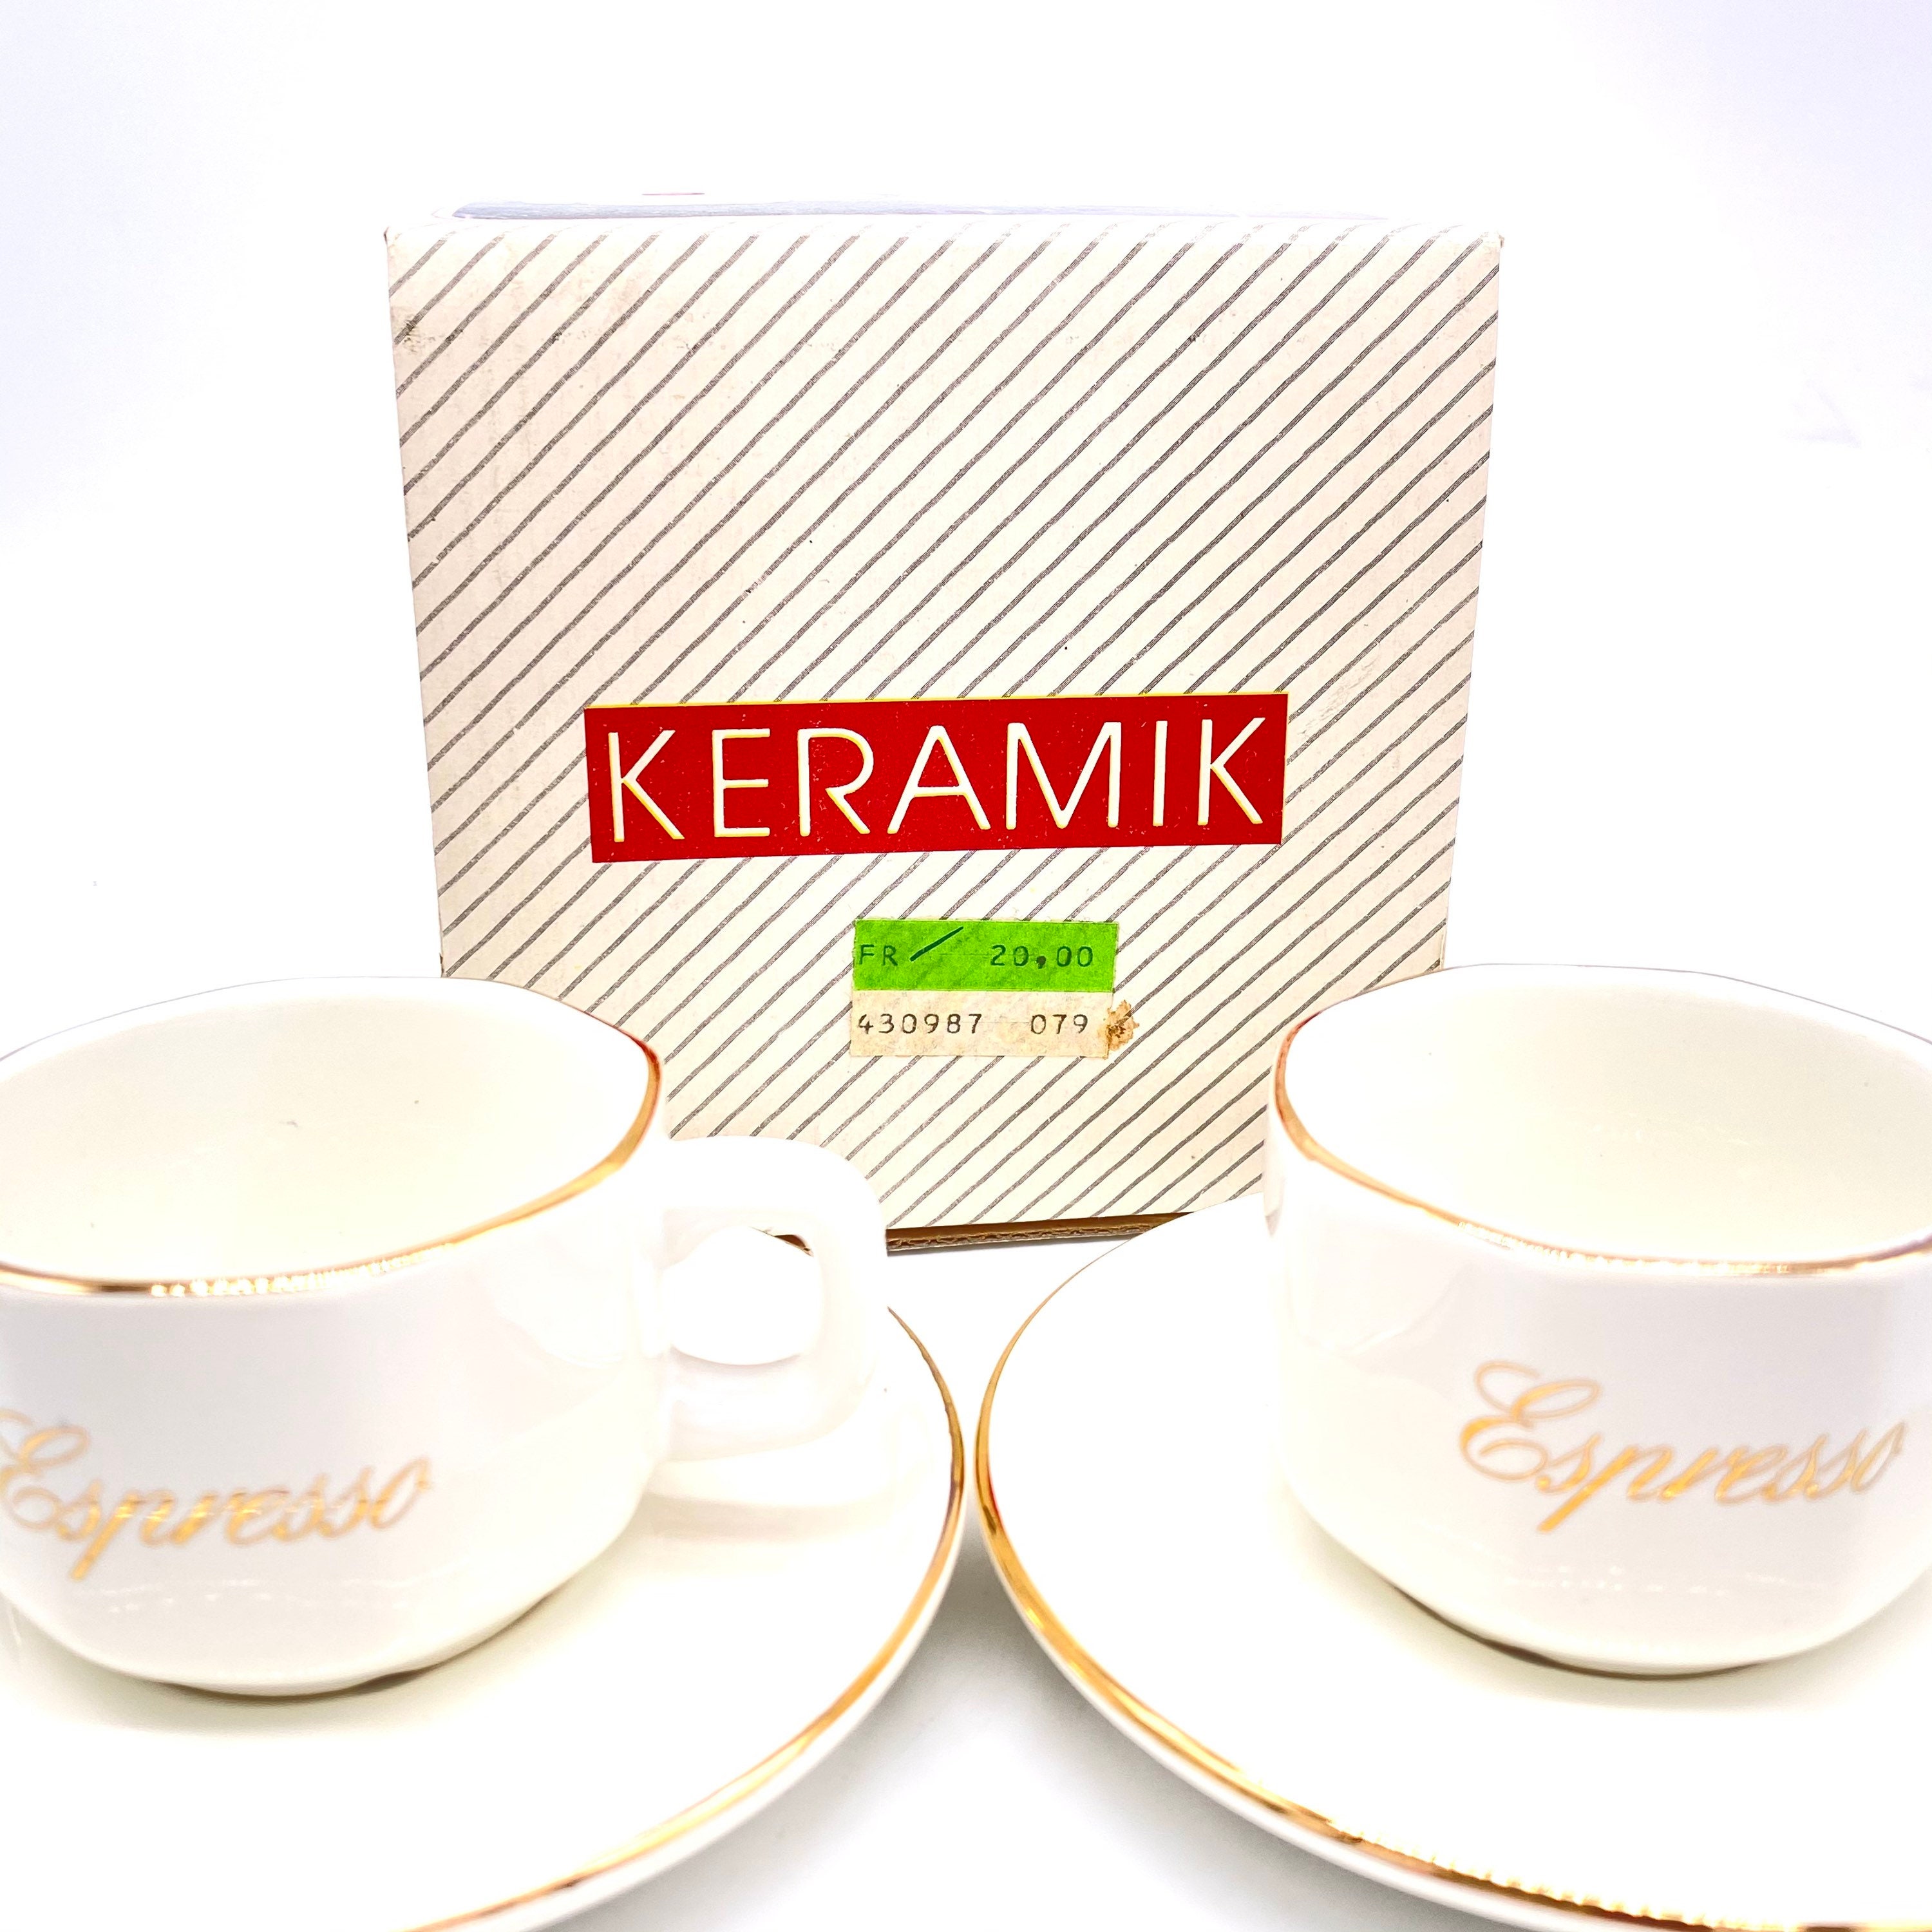 Vintage New in Box Set of 2 Demitasse Cups and Saucers by Keramik Each Cup  Reads Espresso in Gold Script 